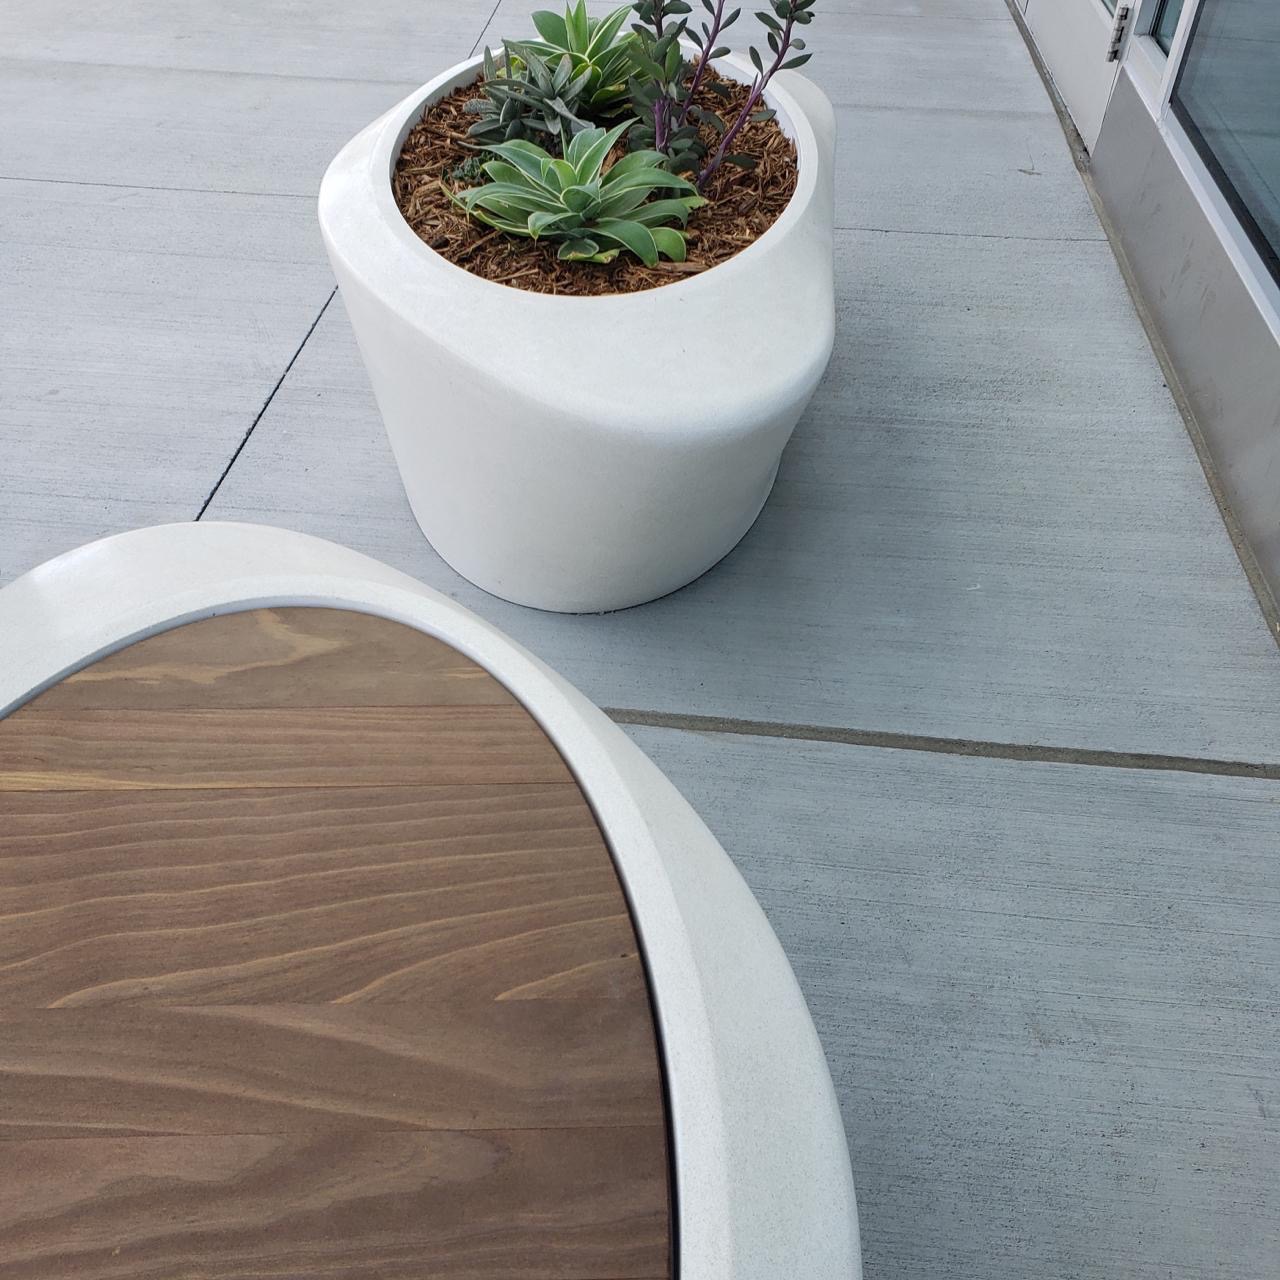 Chair and planter in white with wood.